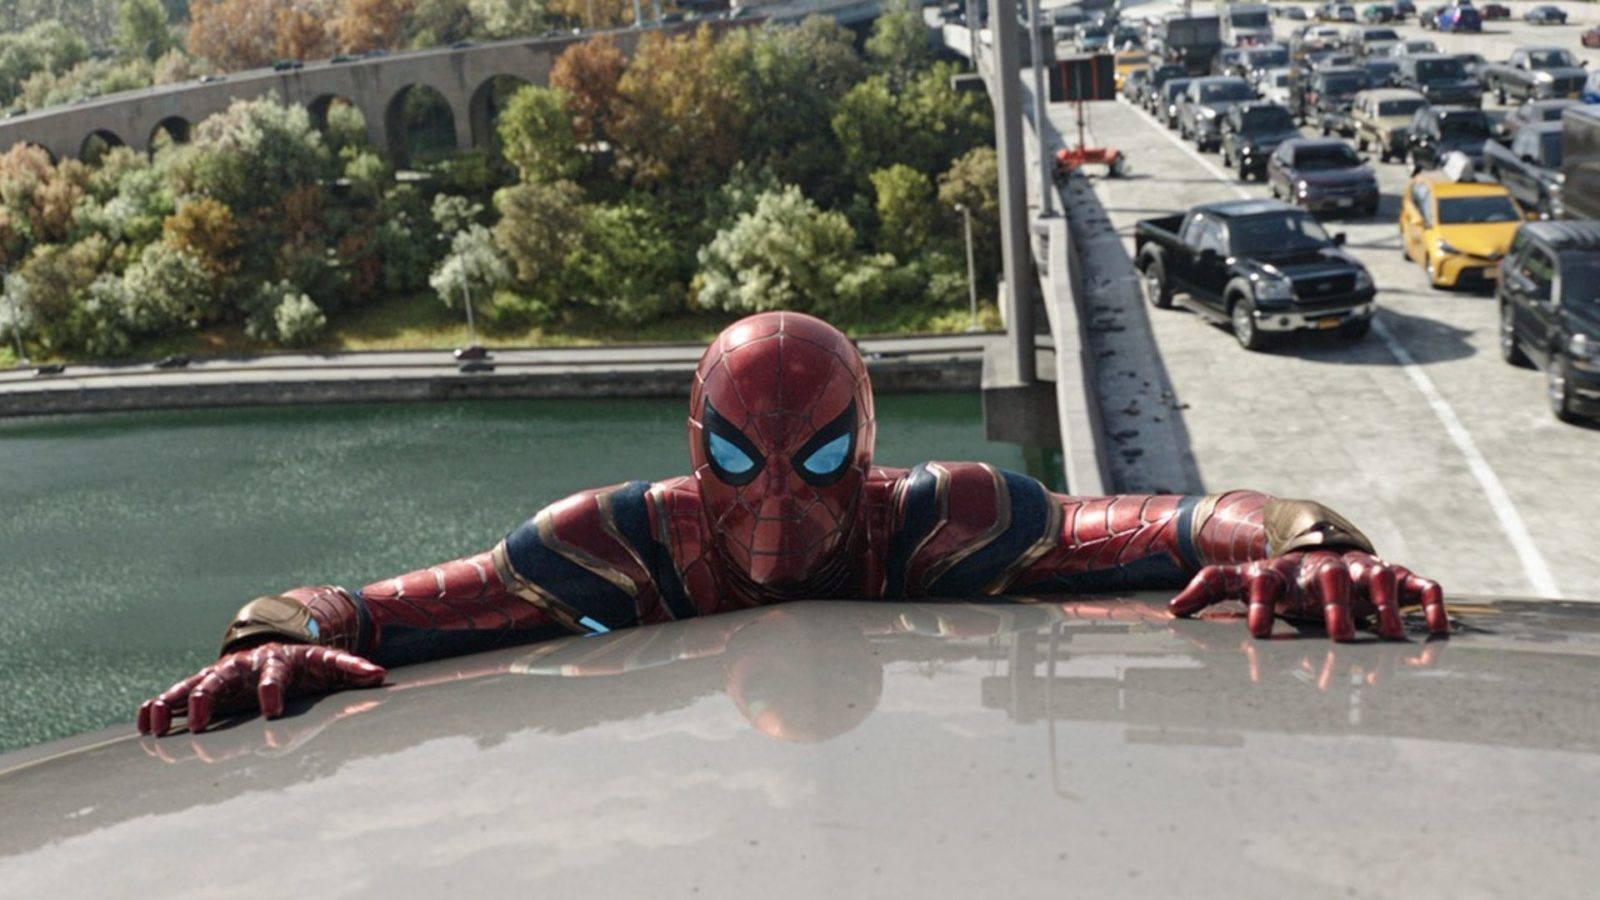 The digital release for ‘Spider-Man: No Way Home’ is slated for March